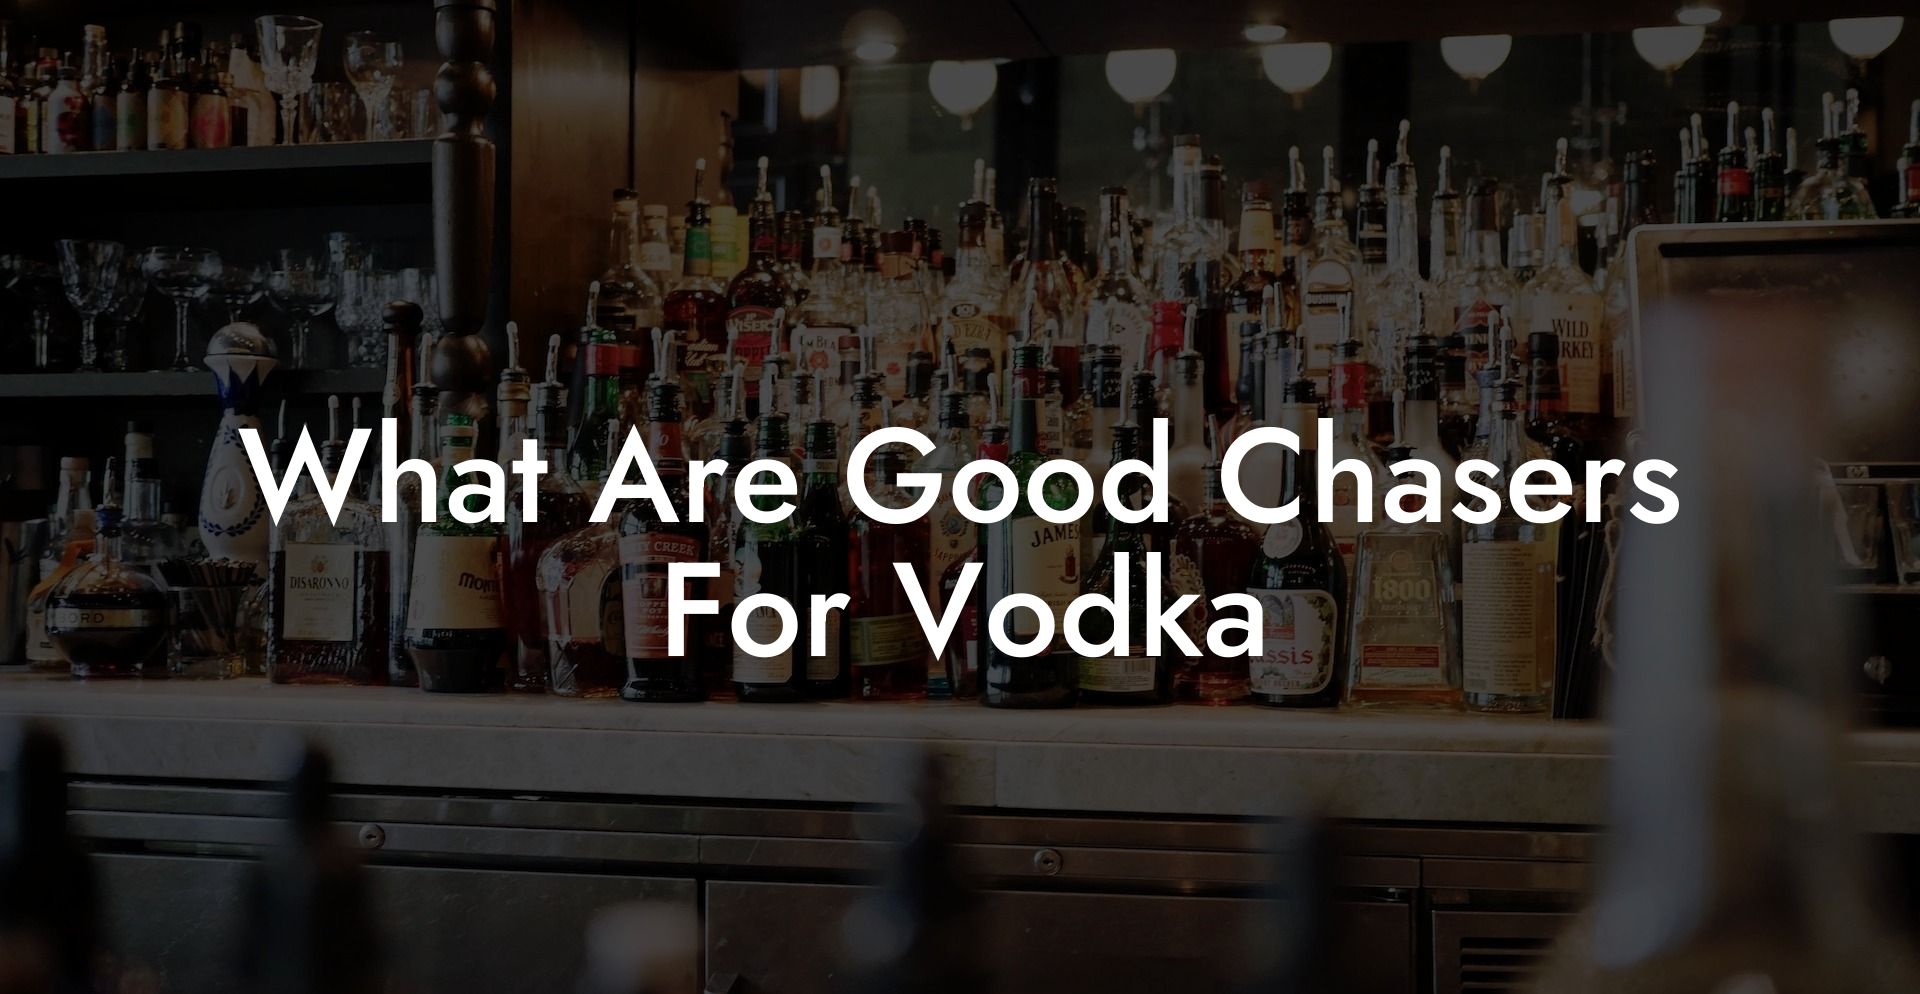 What Are Good Chasers For Vodka